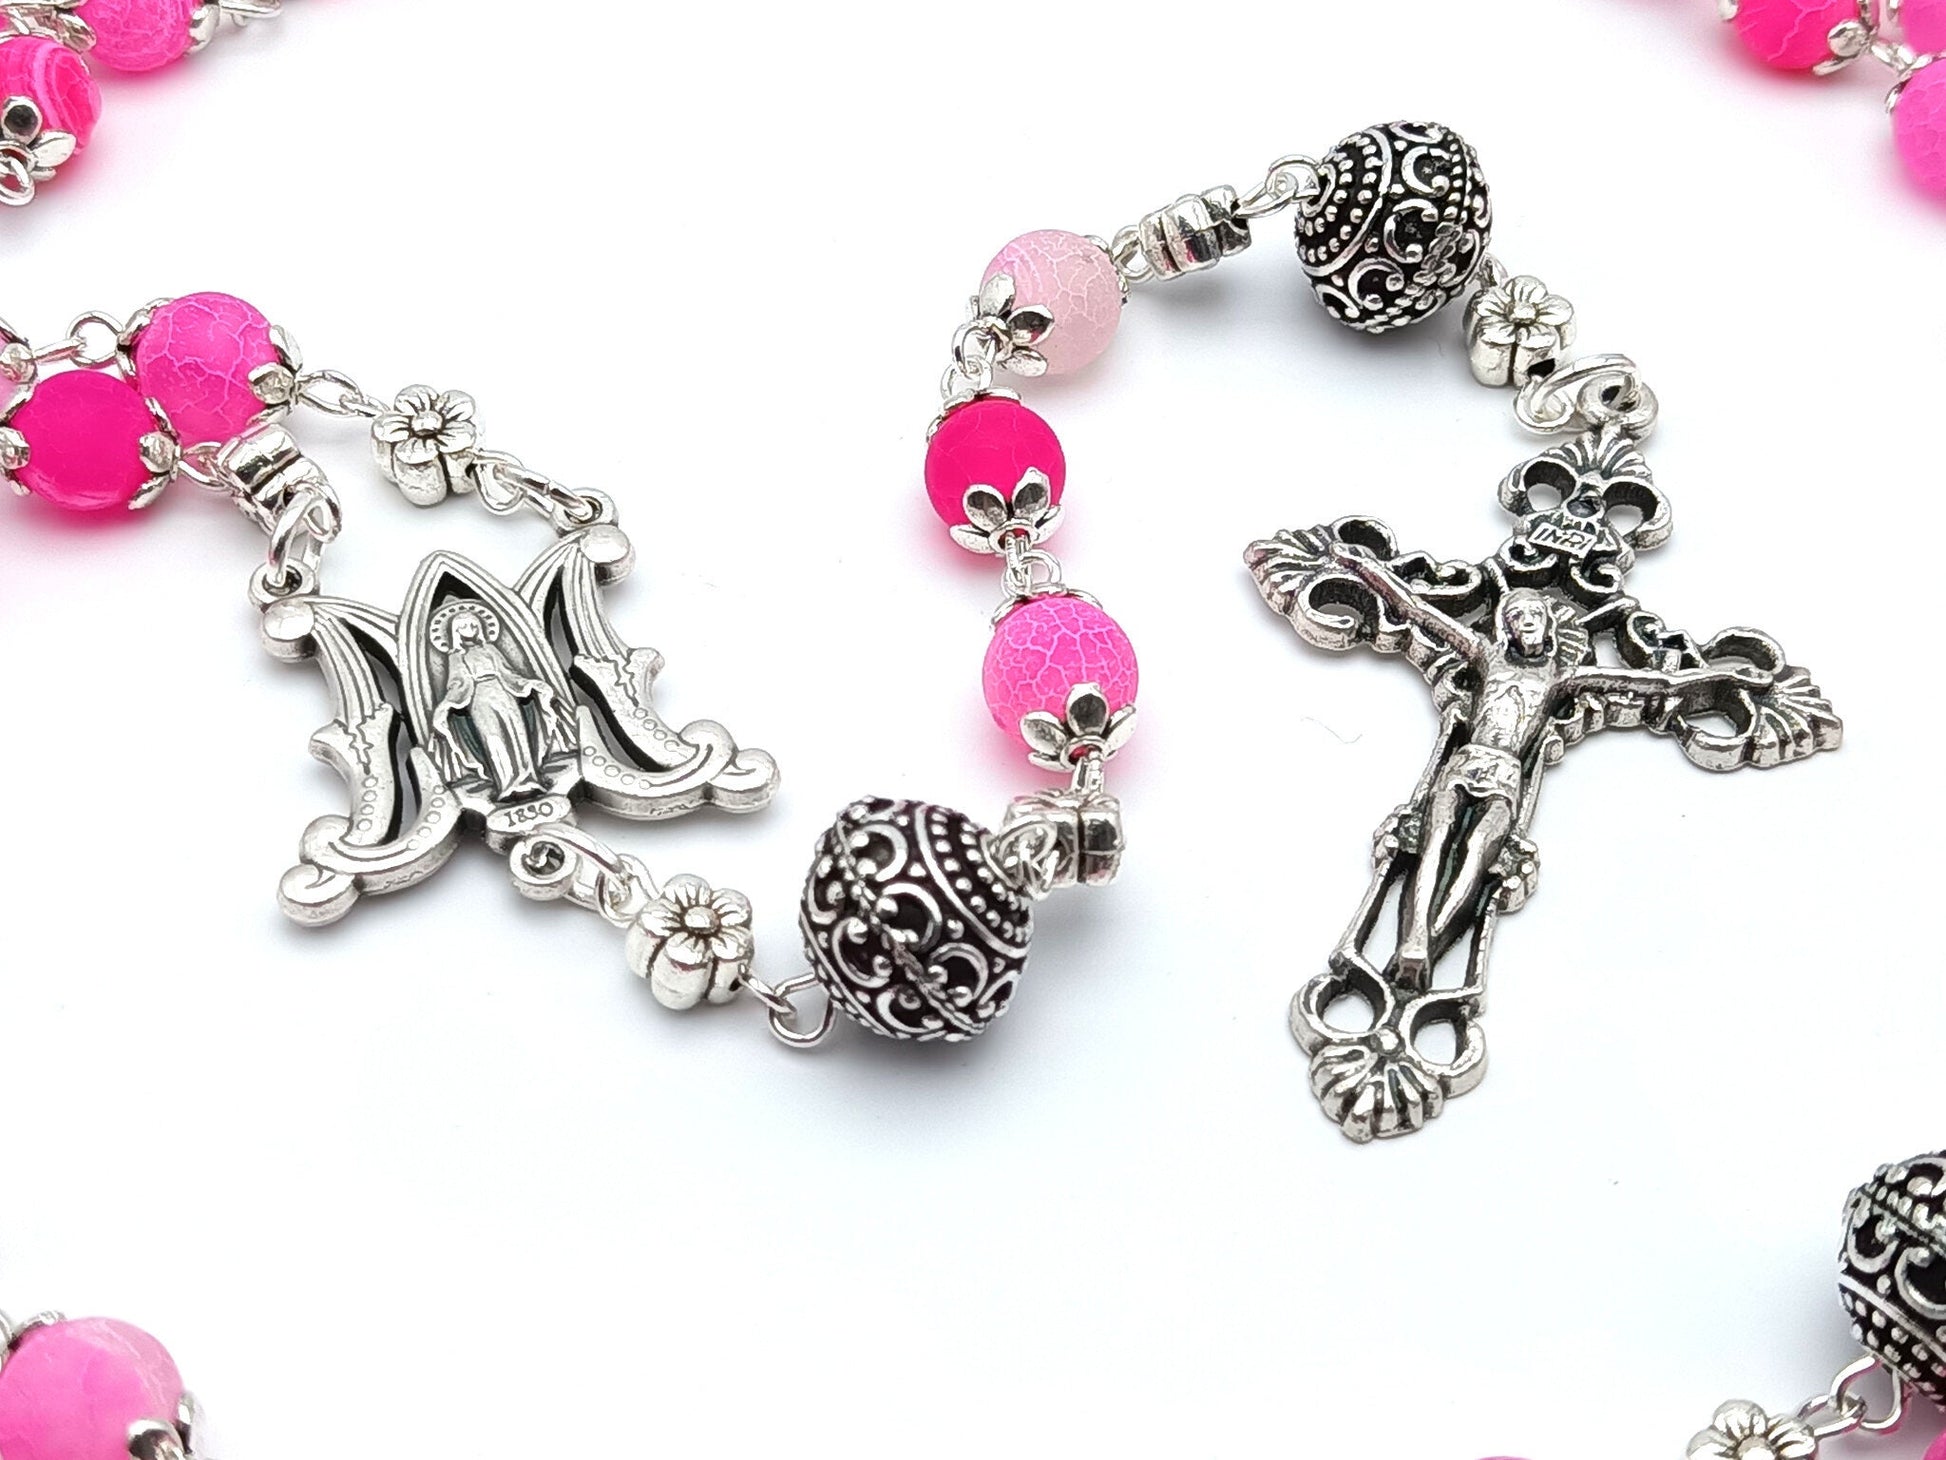 Miraculous medal unique rosary beads with pink agate gemstone beads, silver pater beads, crucifix, centre medal and bead caps.